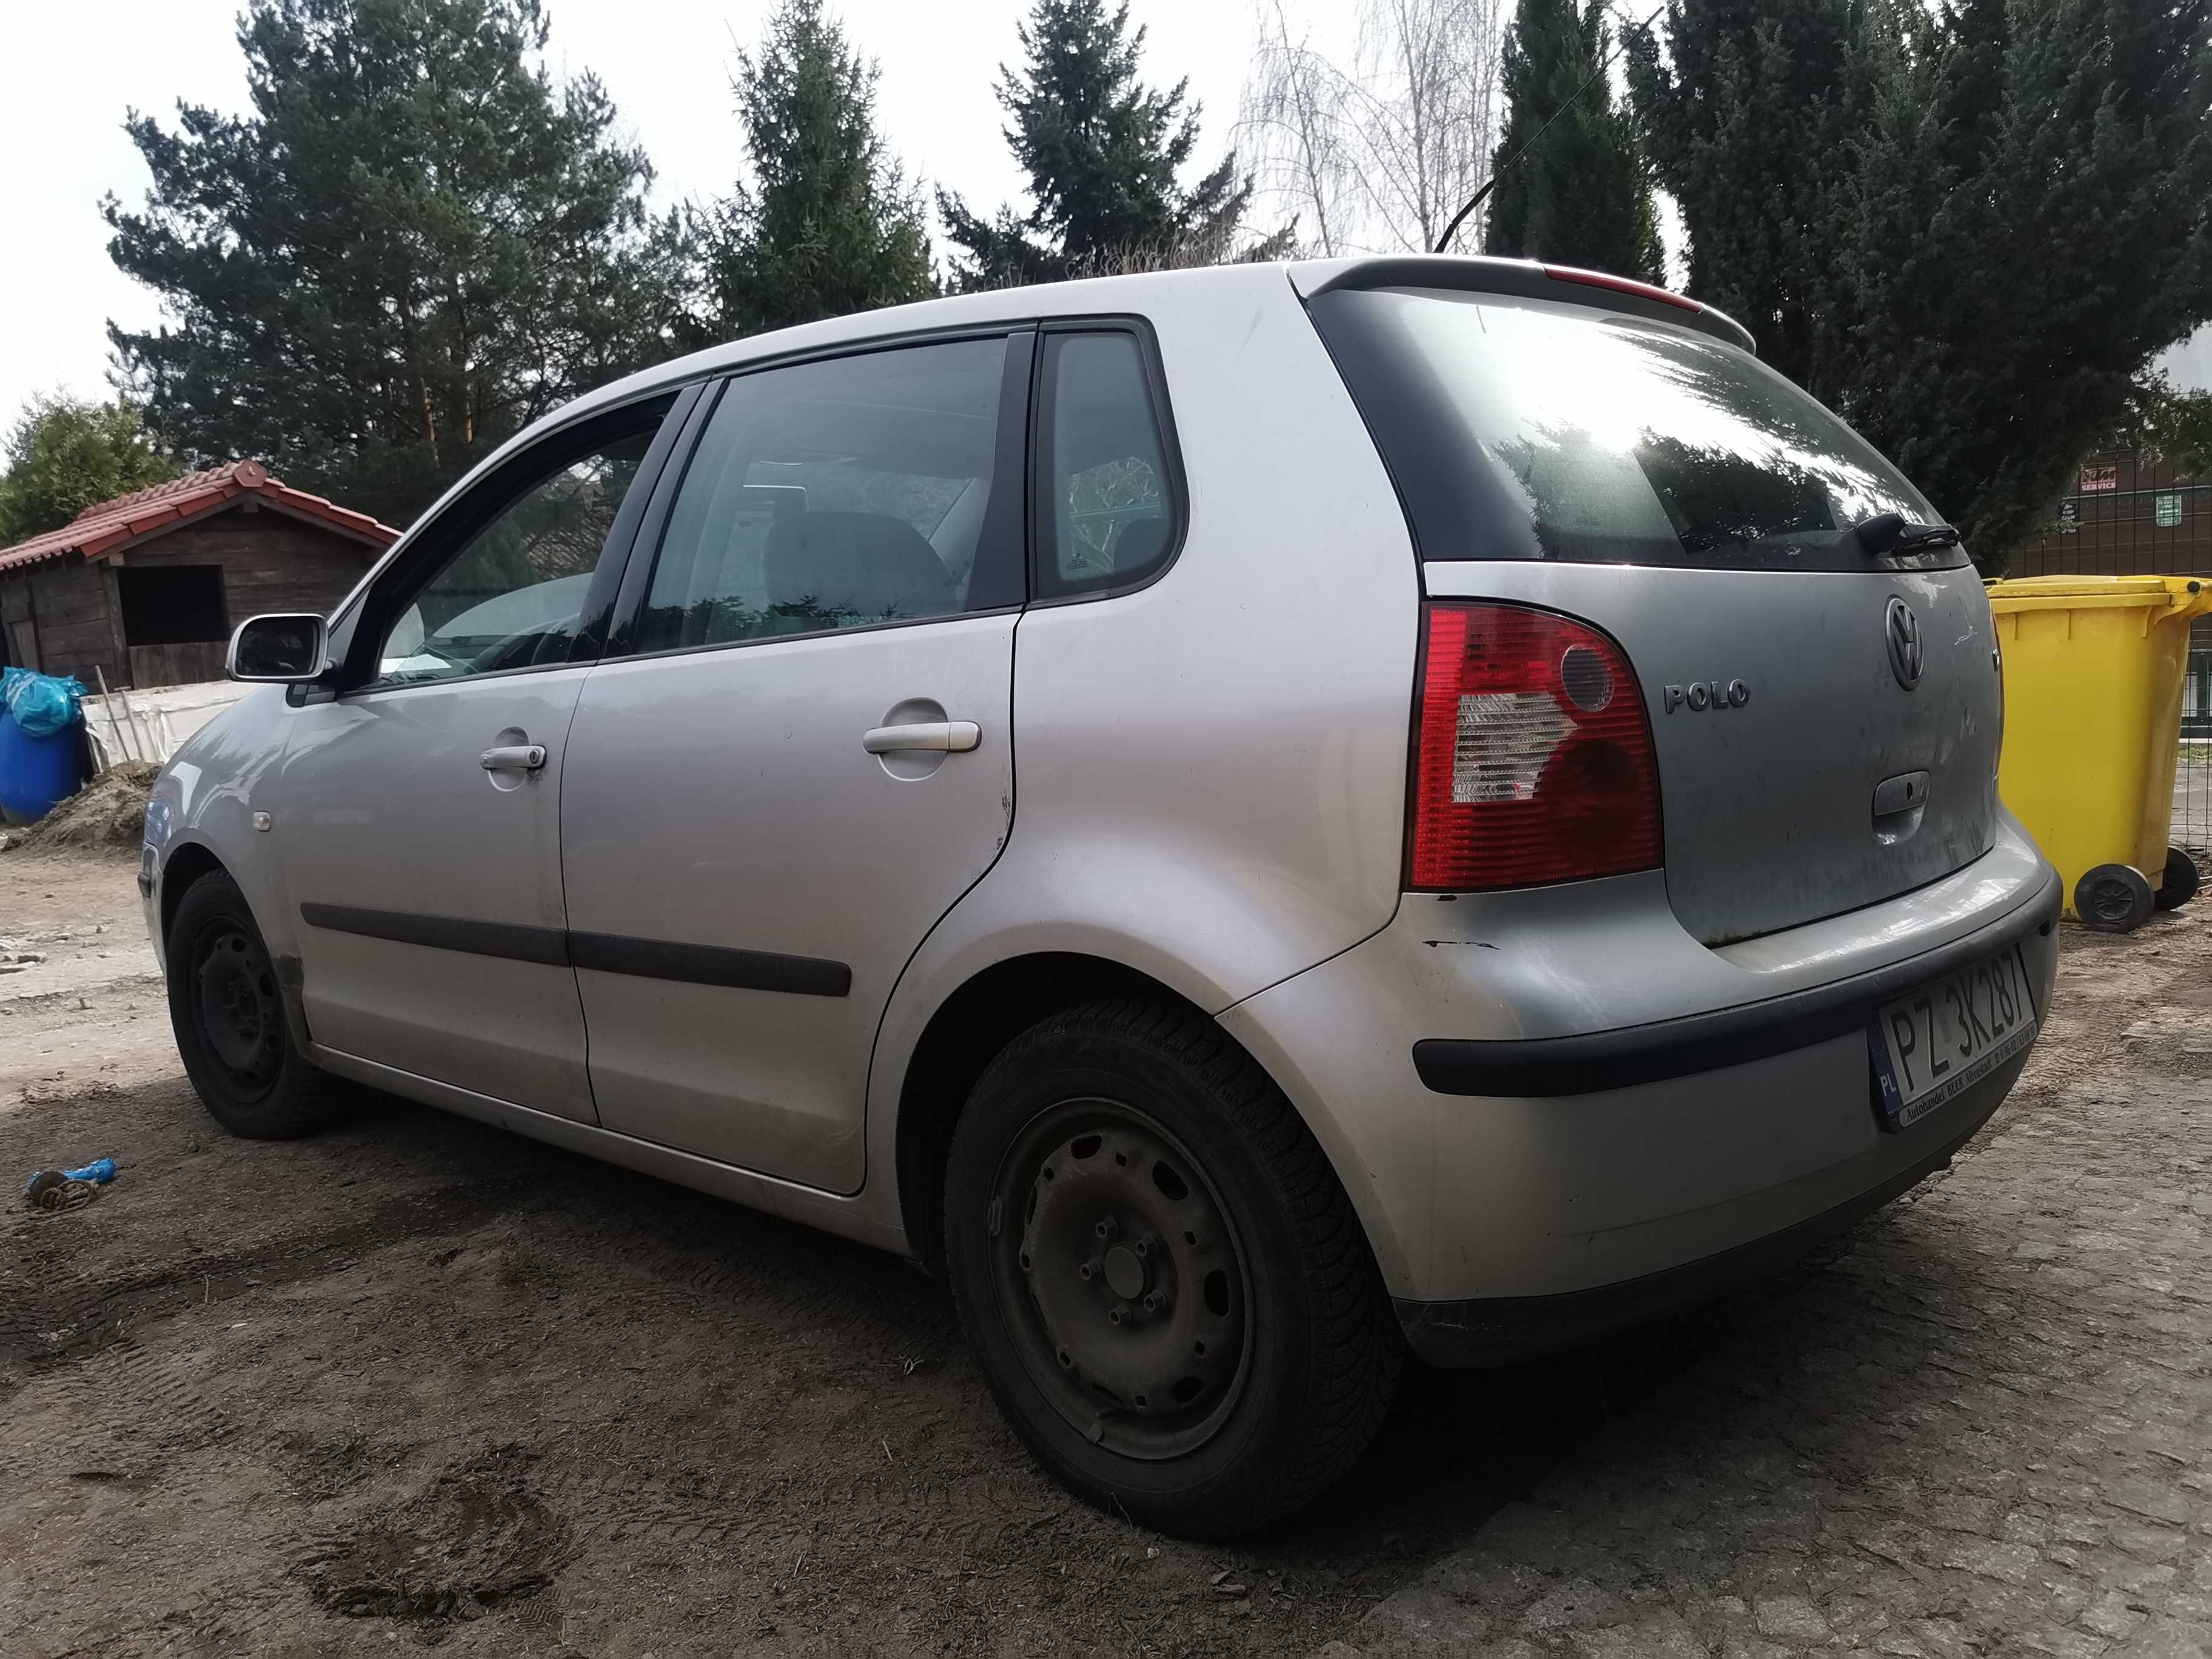 Volkswagen Polo 1,2 benzyna 2002